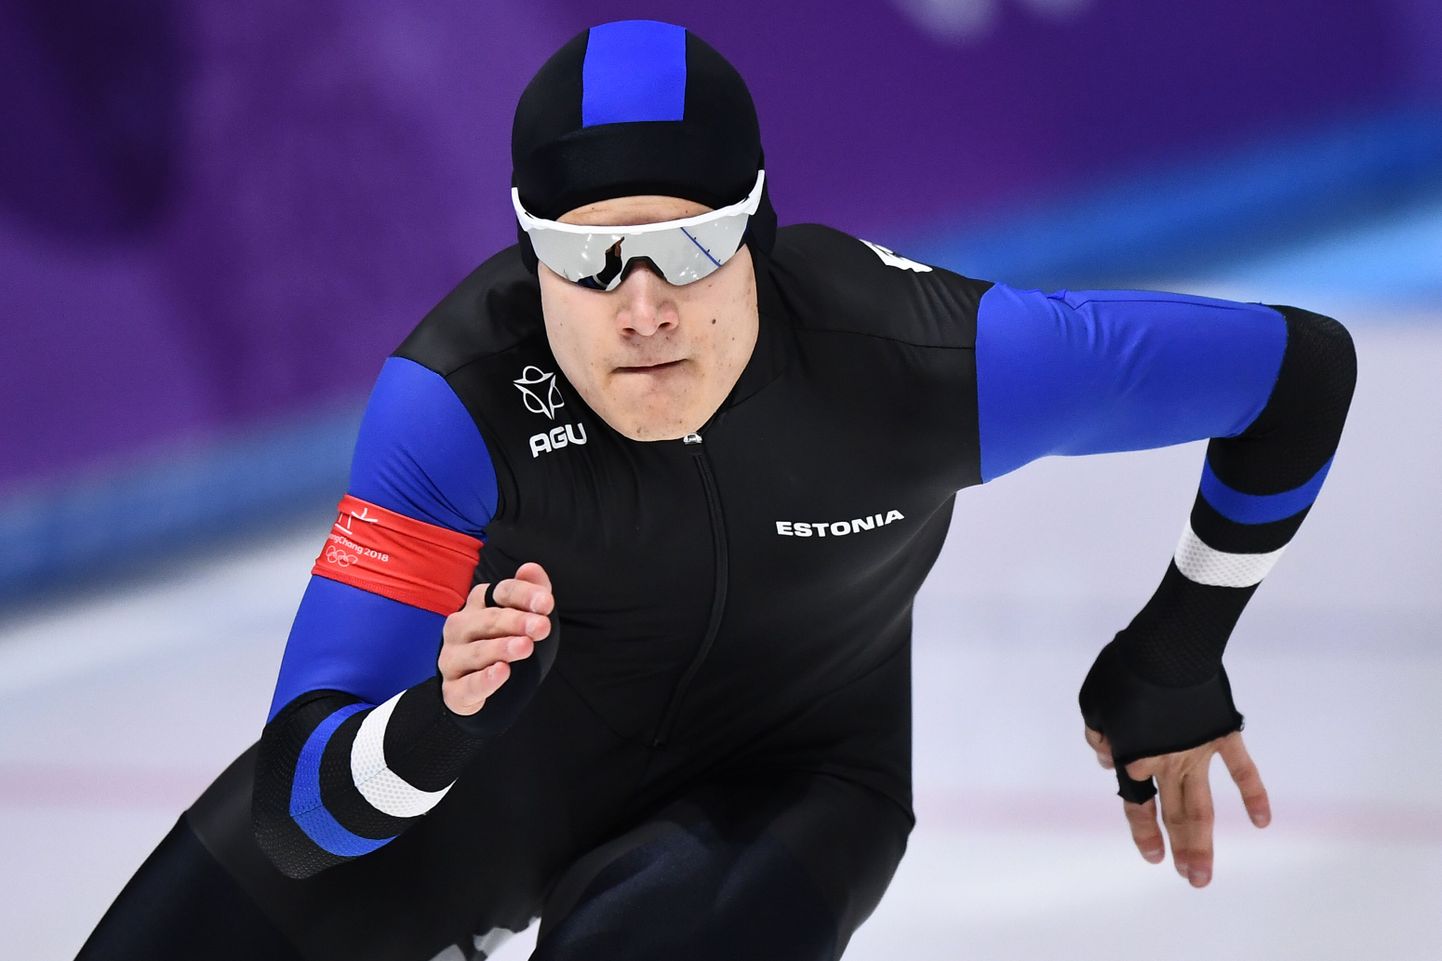 Estonia's Marten Liiv competes in the men's 1,000m speed skating event during the Pyeongchang 2018 Winter Olympic Games at the Gangneung Oval in Gangneung on February 23, 2018. / AFP PHOTO / ARIS MESSINIS